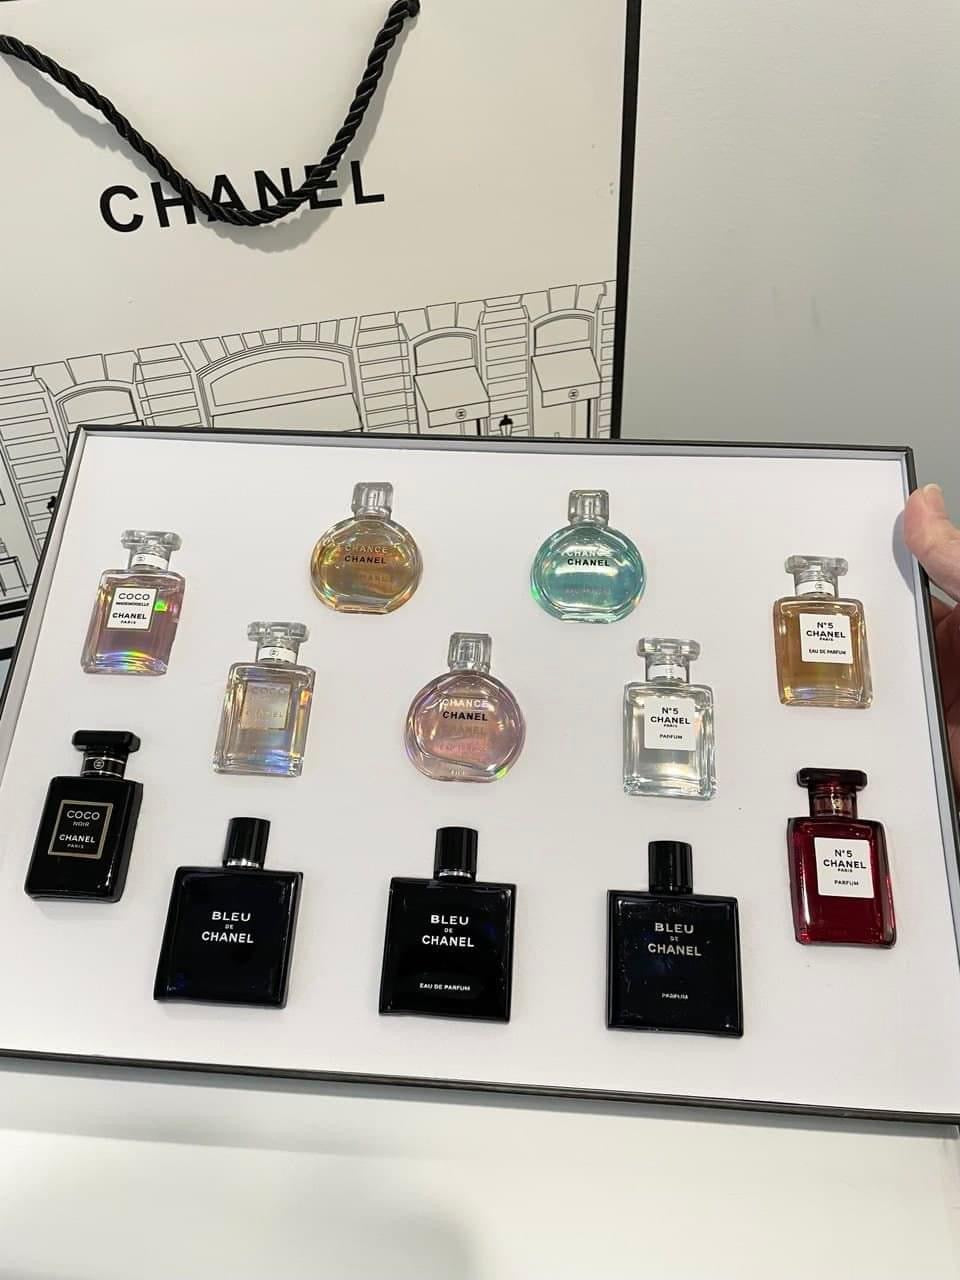 Gift Set of perfume miniatures Chanel Chance (Chanel Chance) 5 in1